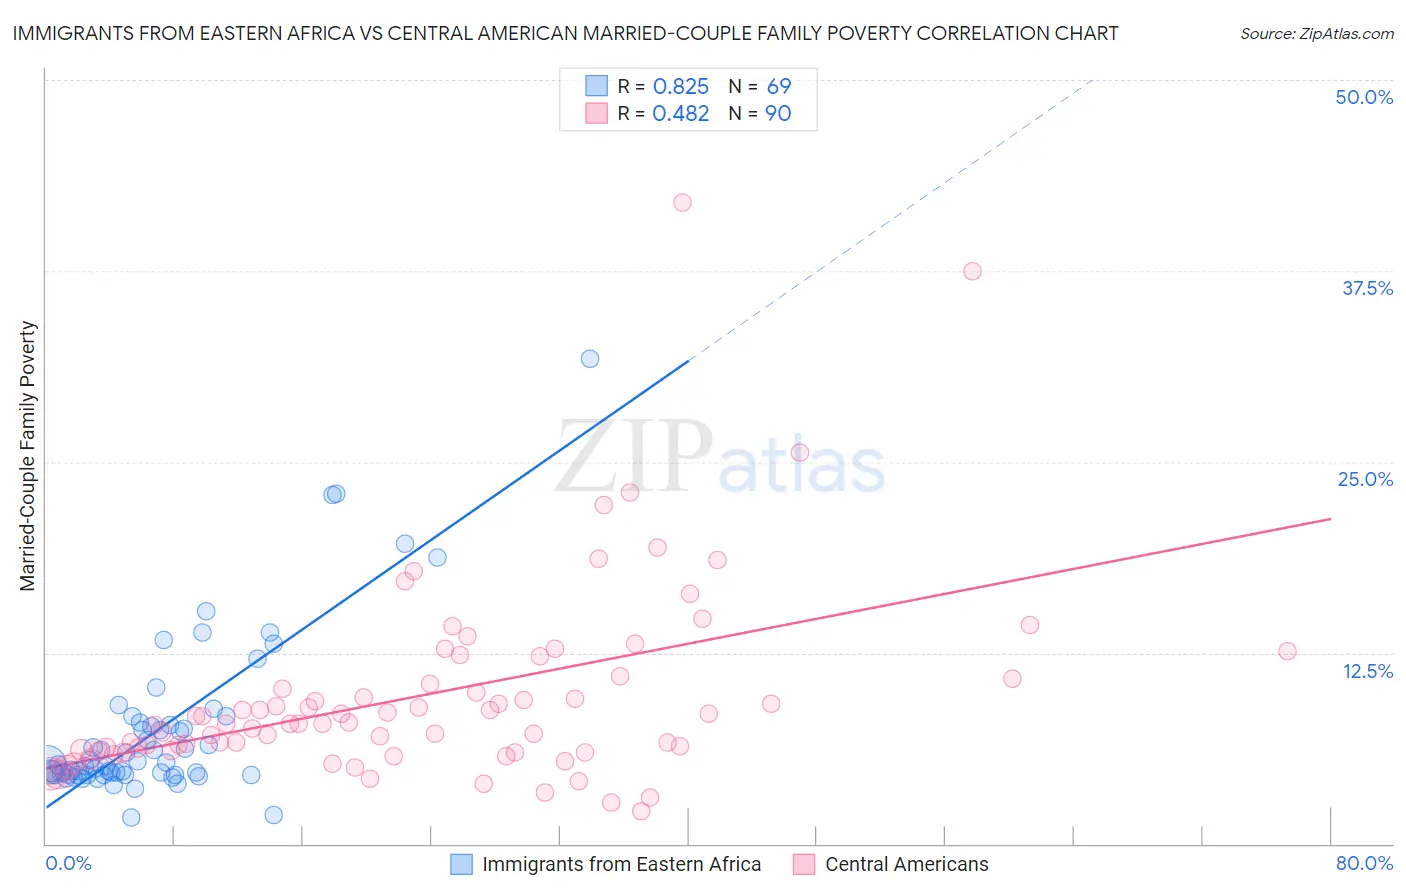 Immigrants from Eastern Africa vs Central American Married-Couple Family Poverty